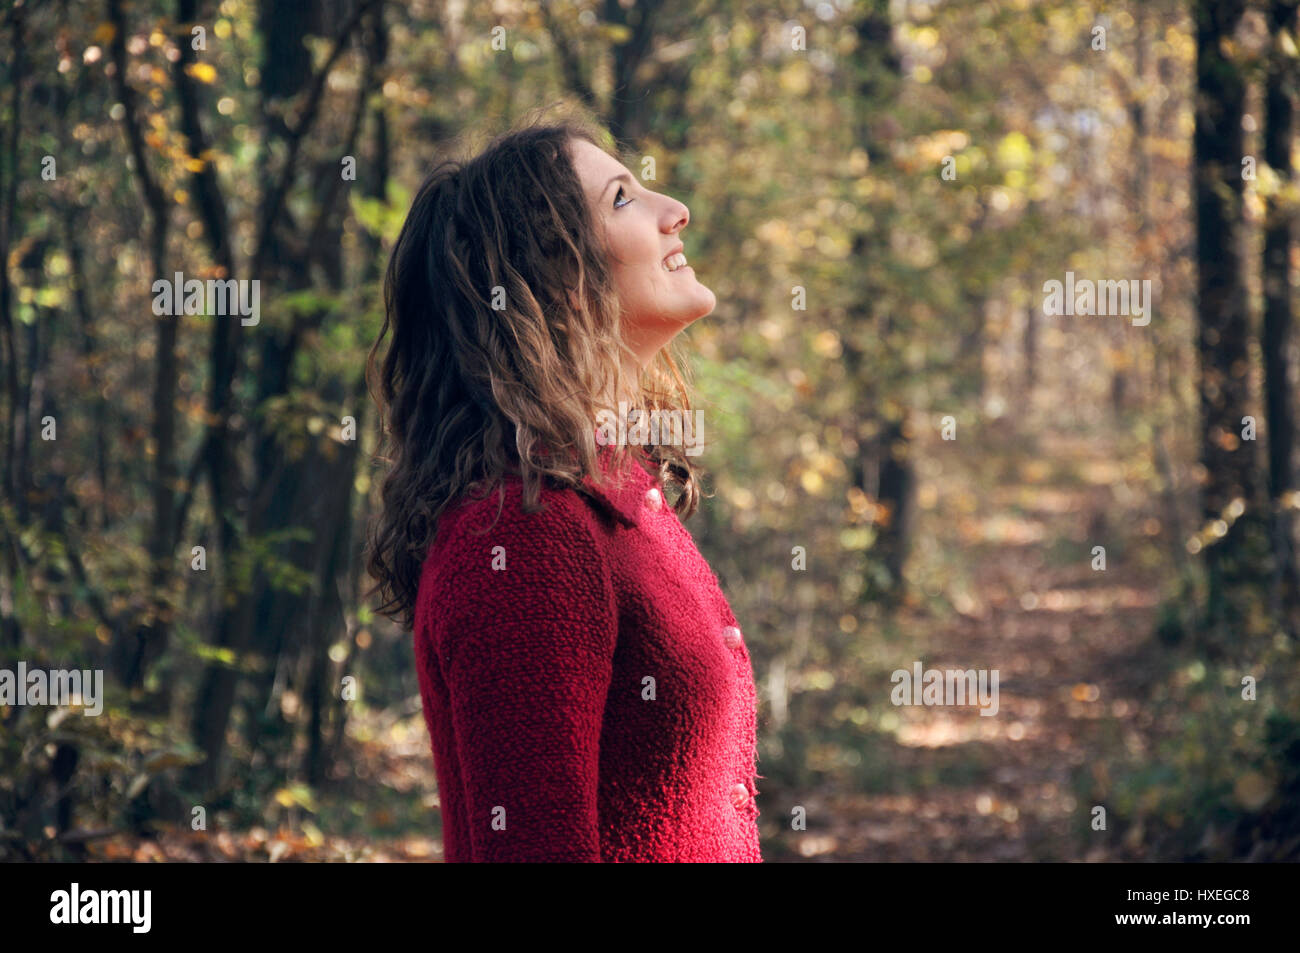 Young woman in forest looking up Stock Photo